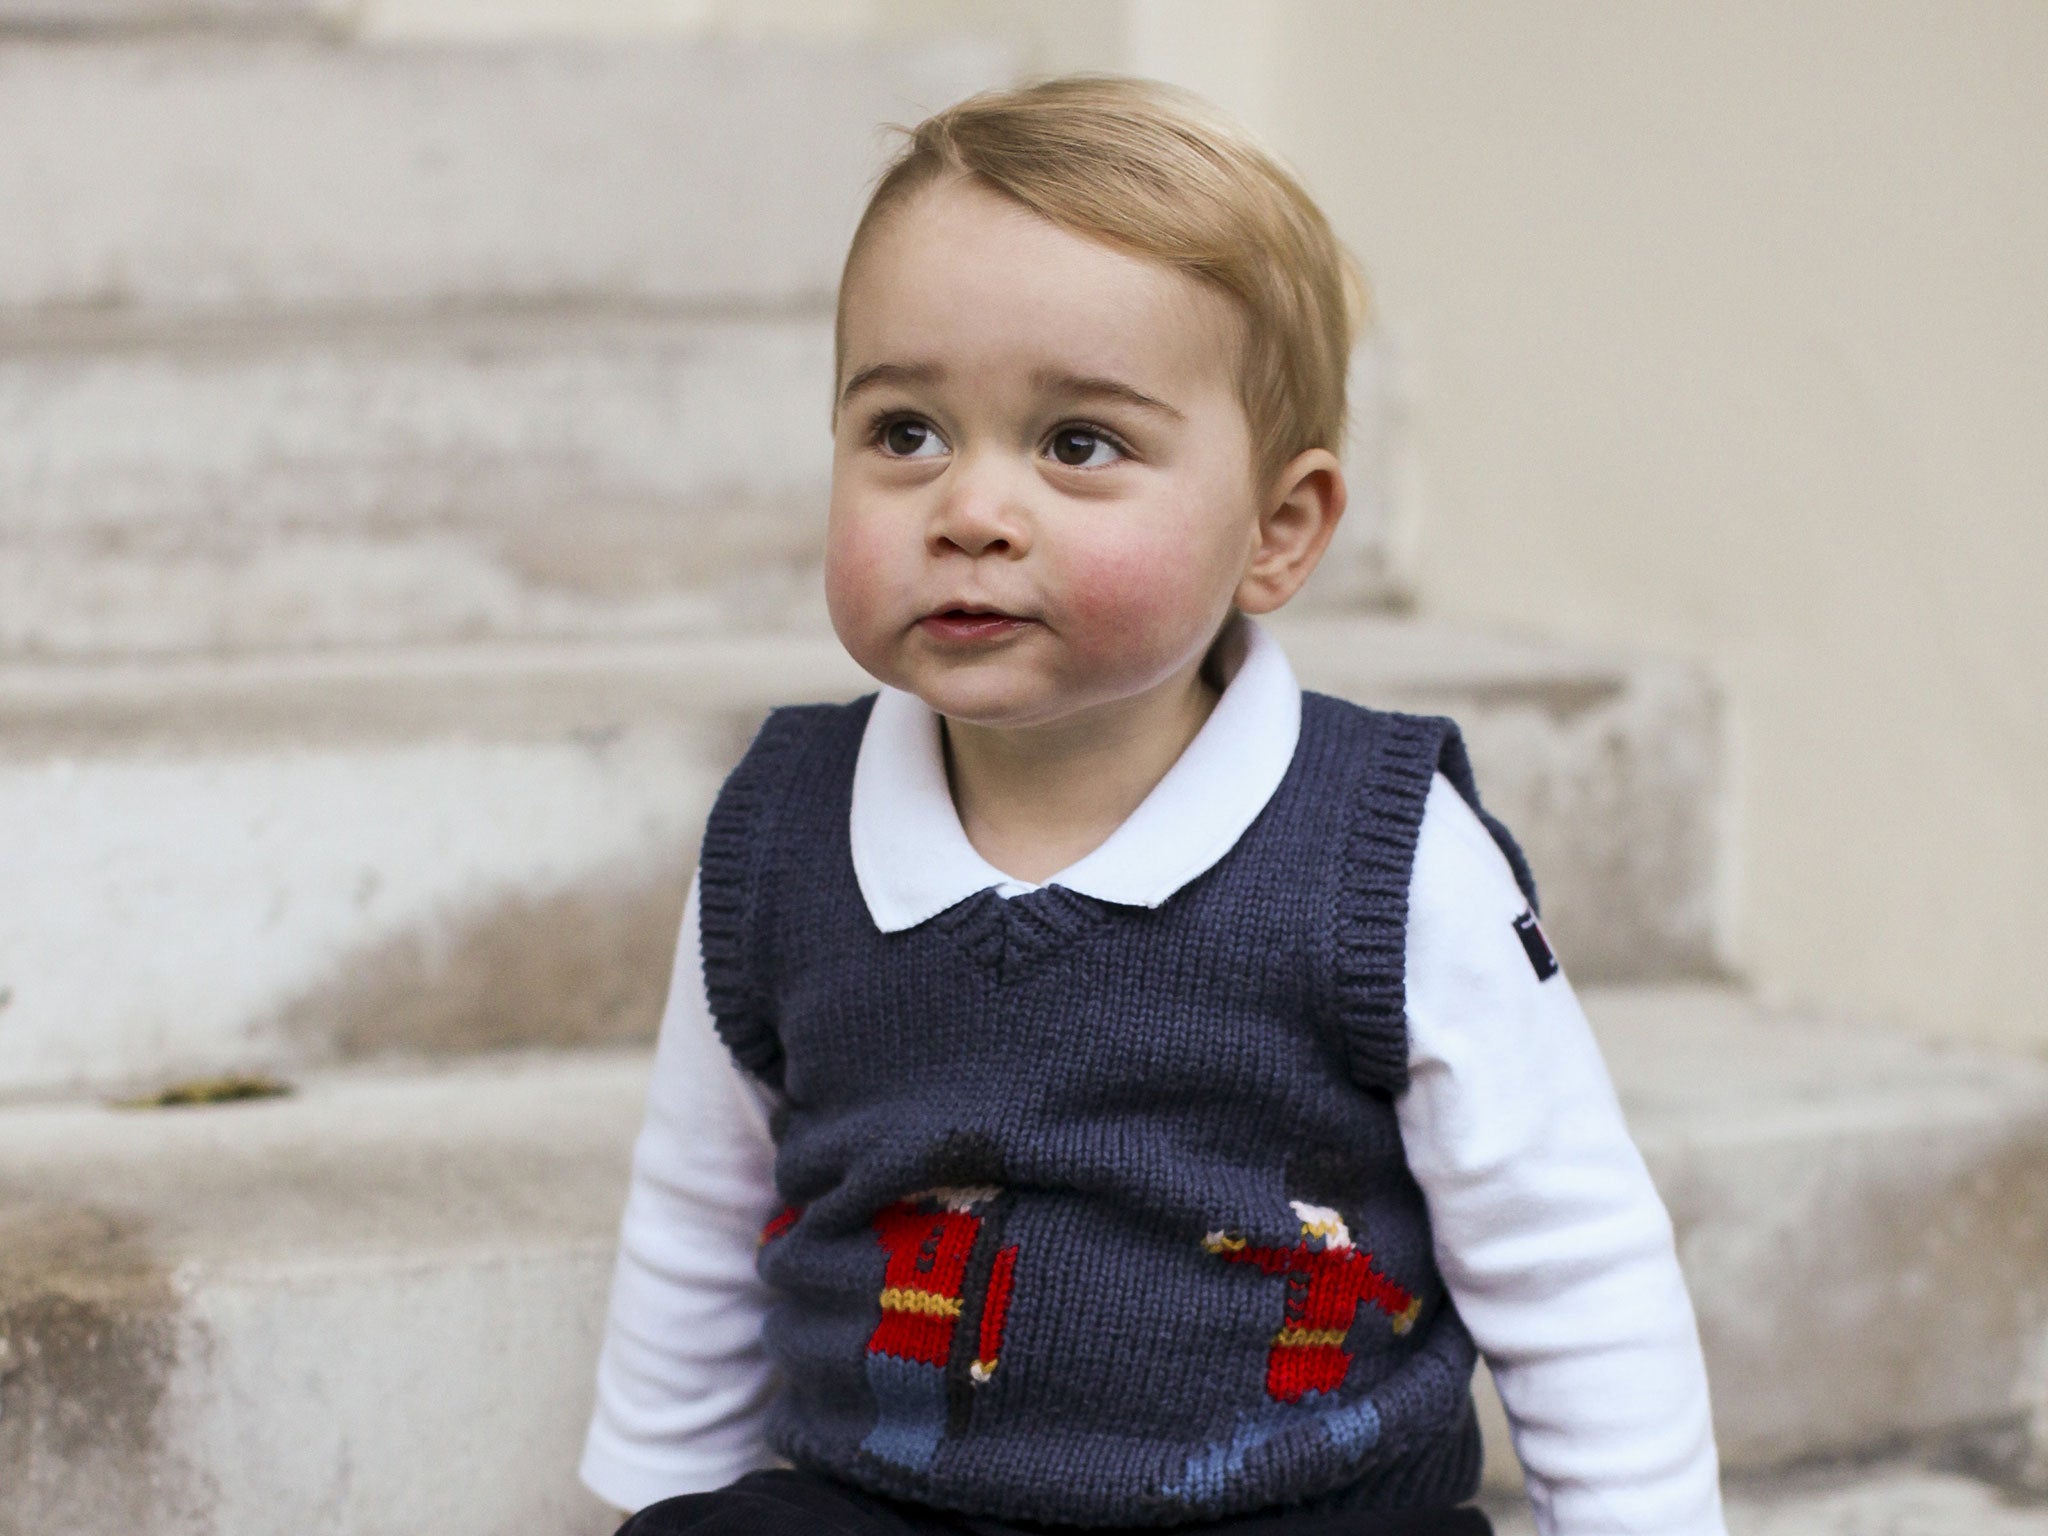 In this handout image of three released on December 13, 2014 by Kensington Palace, Prince George sits for his official Christmas picture in a courtyard